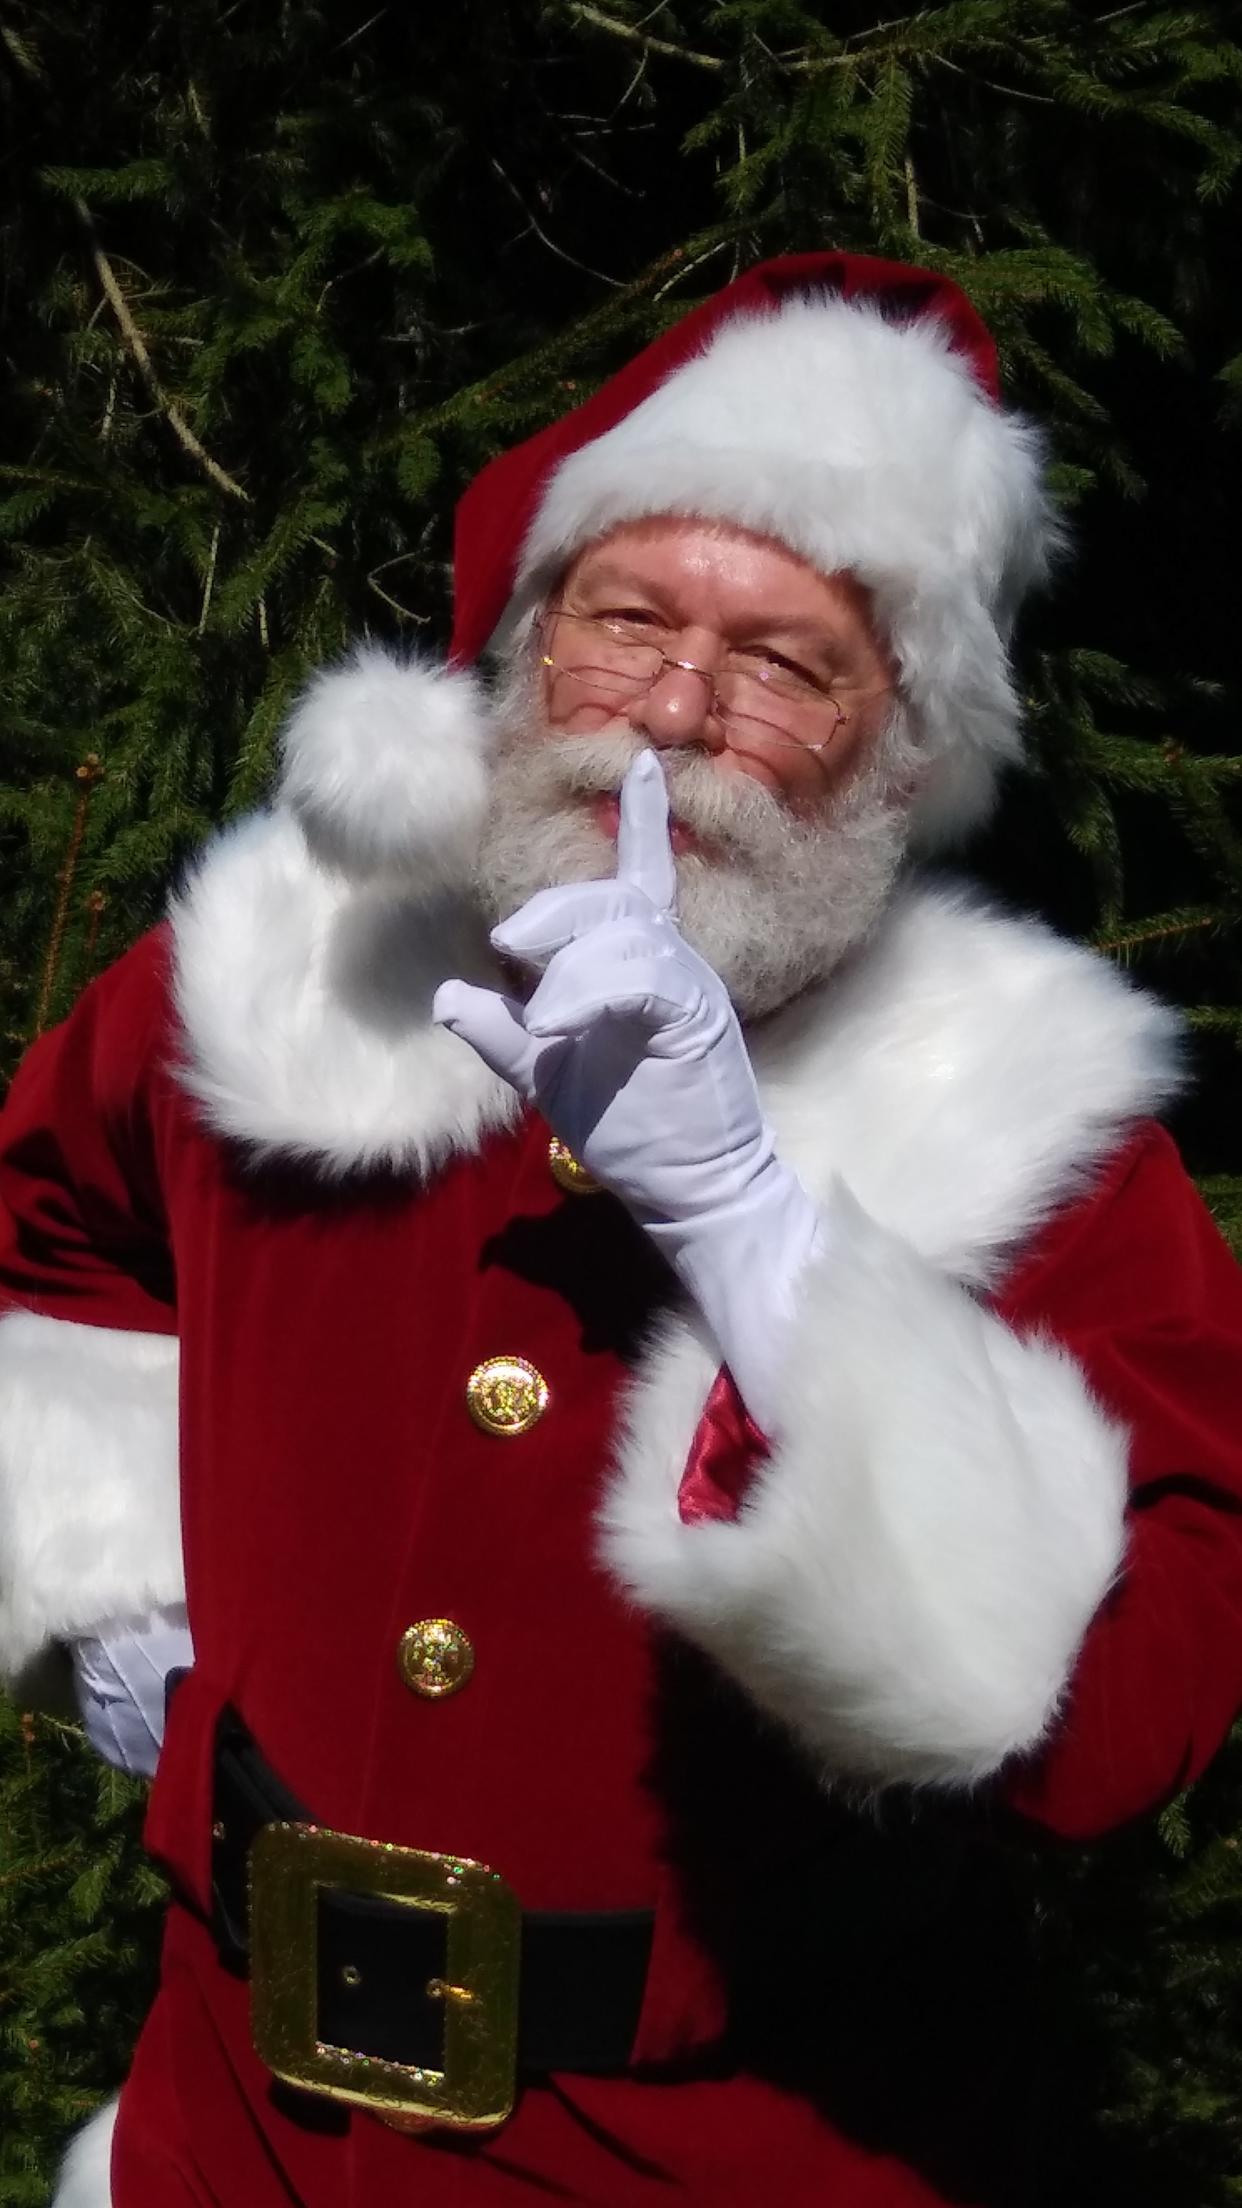 Emerson Roth has portrayed Santa Claus since 2019. His wife Kathy joins him as Mrs. Claus at events.